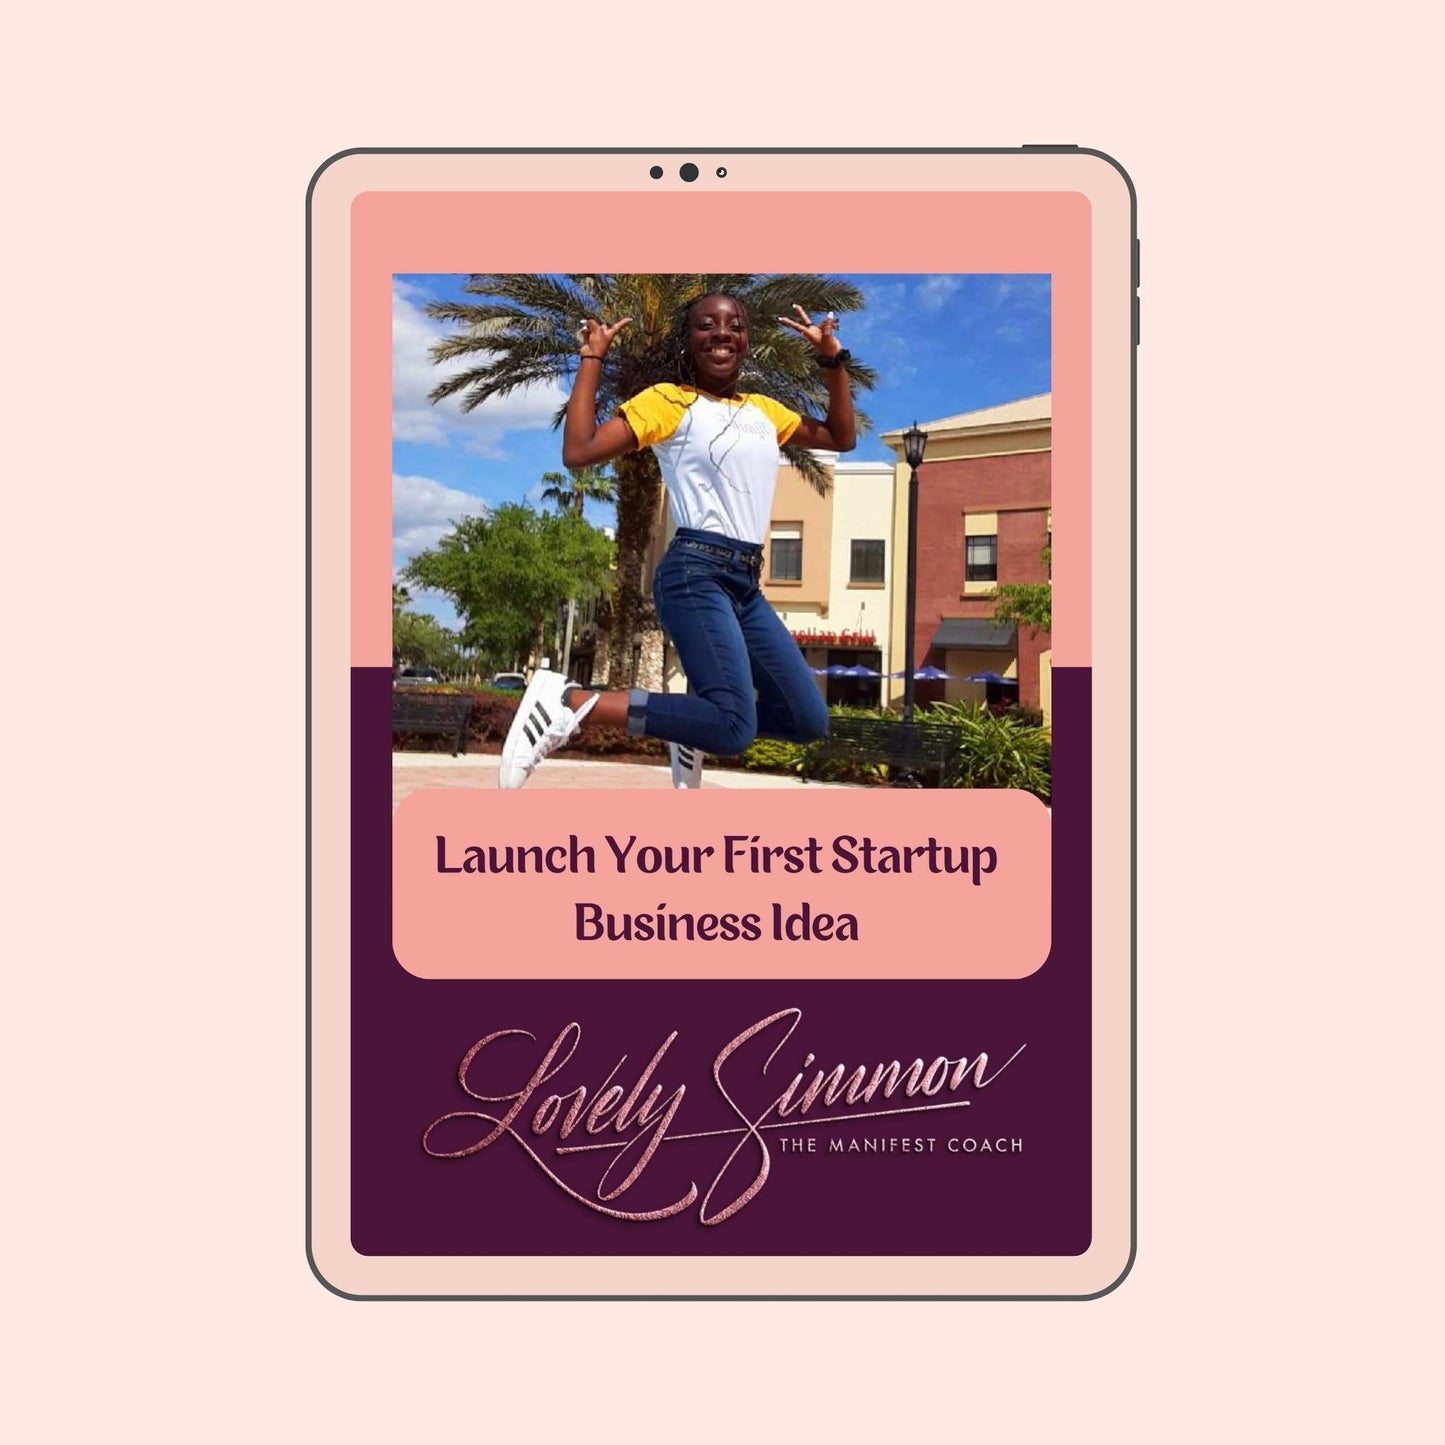 FREE eBook - Launch Your First Startup Business Idea